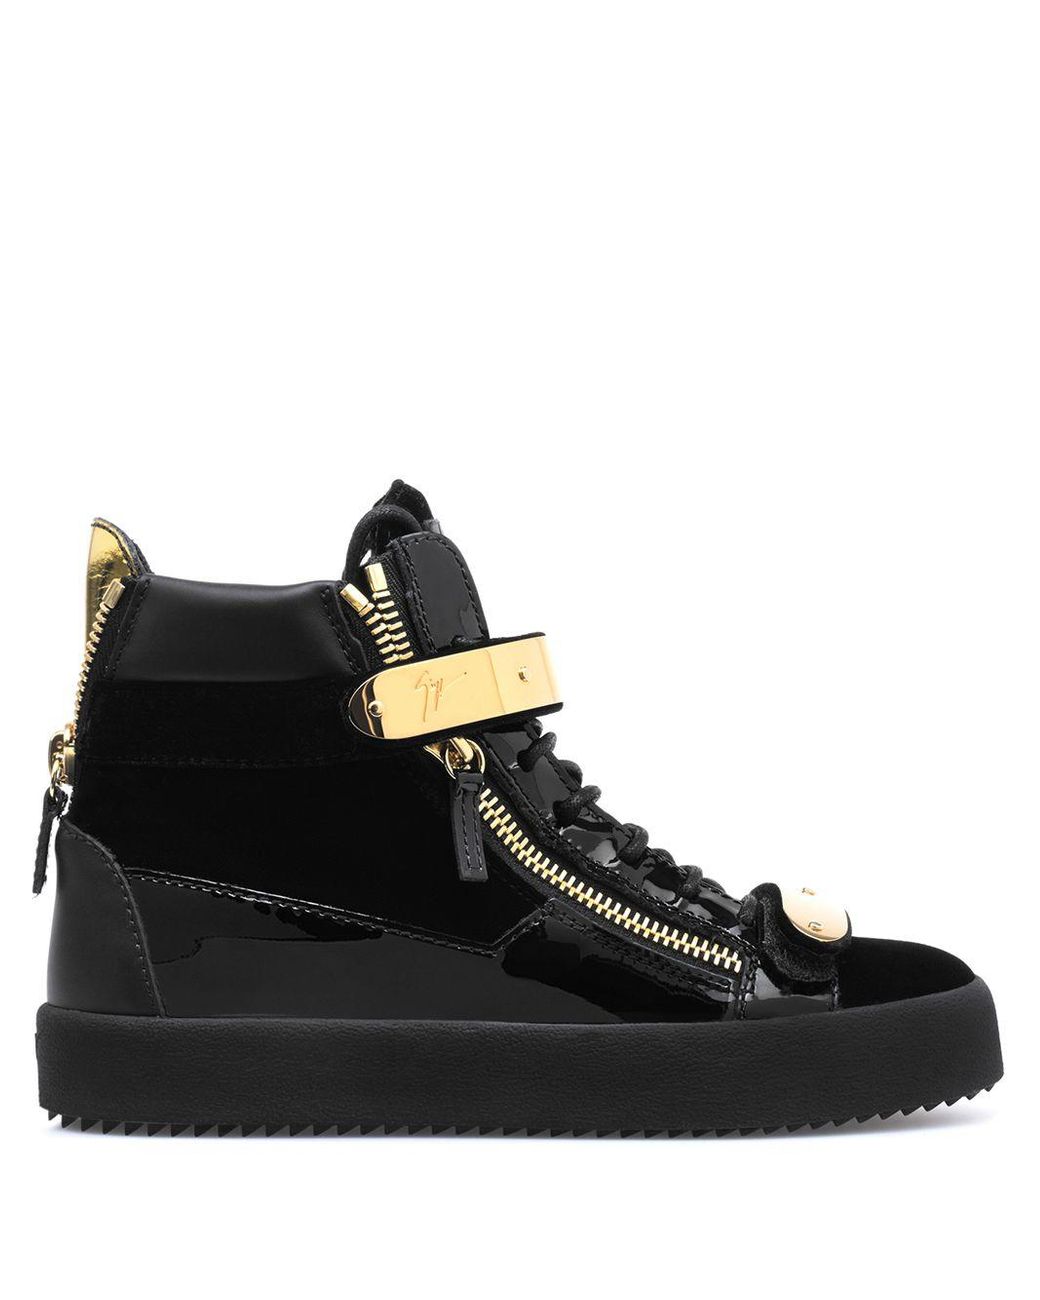 Giuseppe Zanotti Coby High-top Velvet Trainers in Black - Save 45% - Lyst